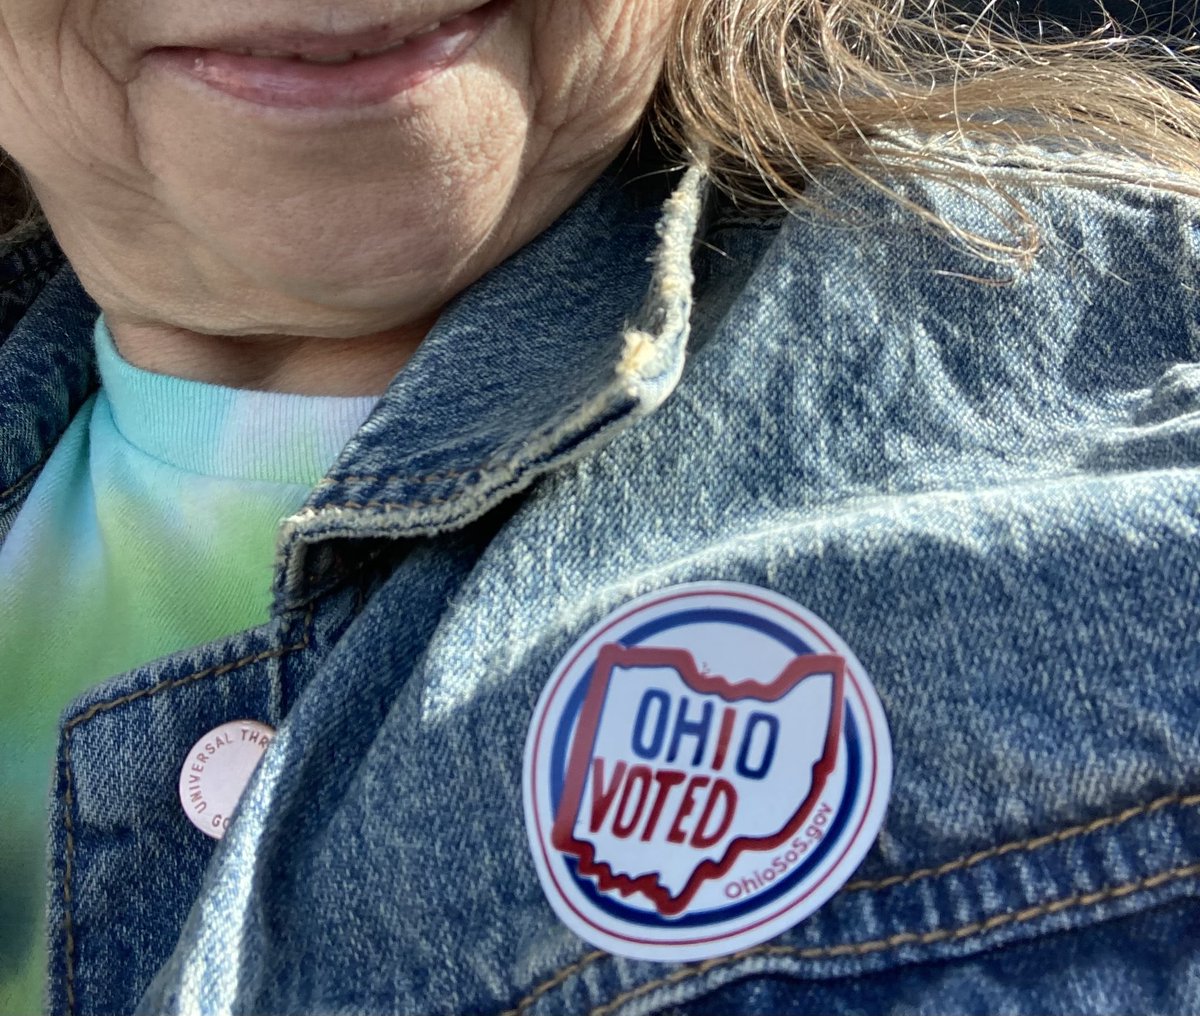 It’s strange not having one of my kids voting with me. But I did it!
#VoteYesOnIssue1 & #VoteYesOnIssue2
Let’s do this!